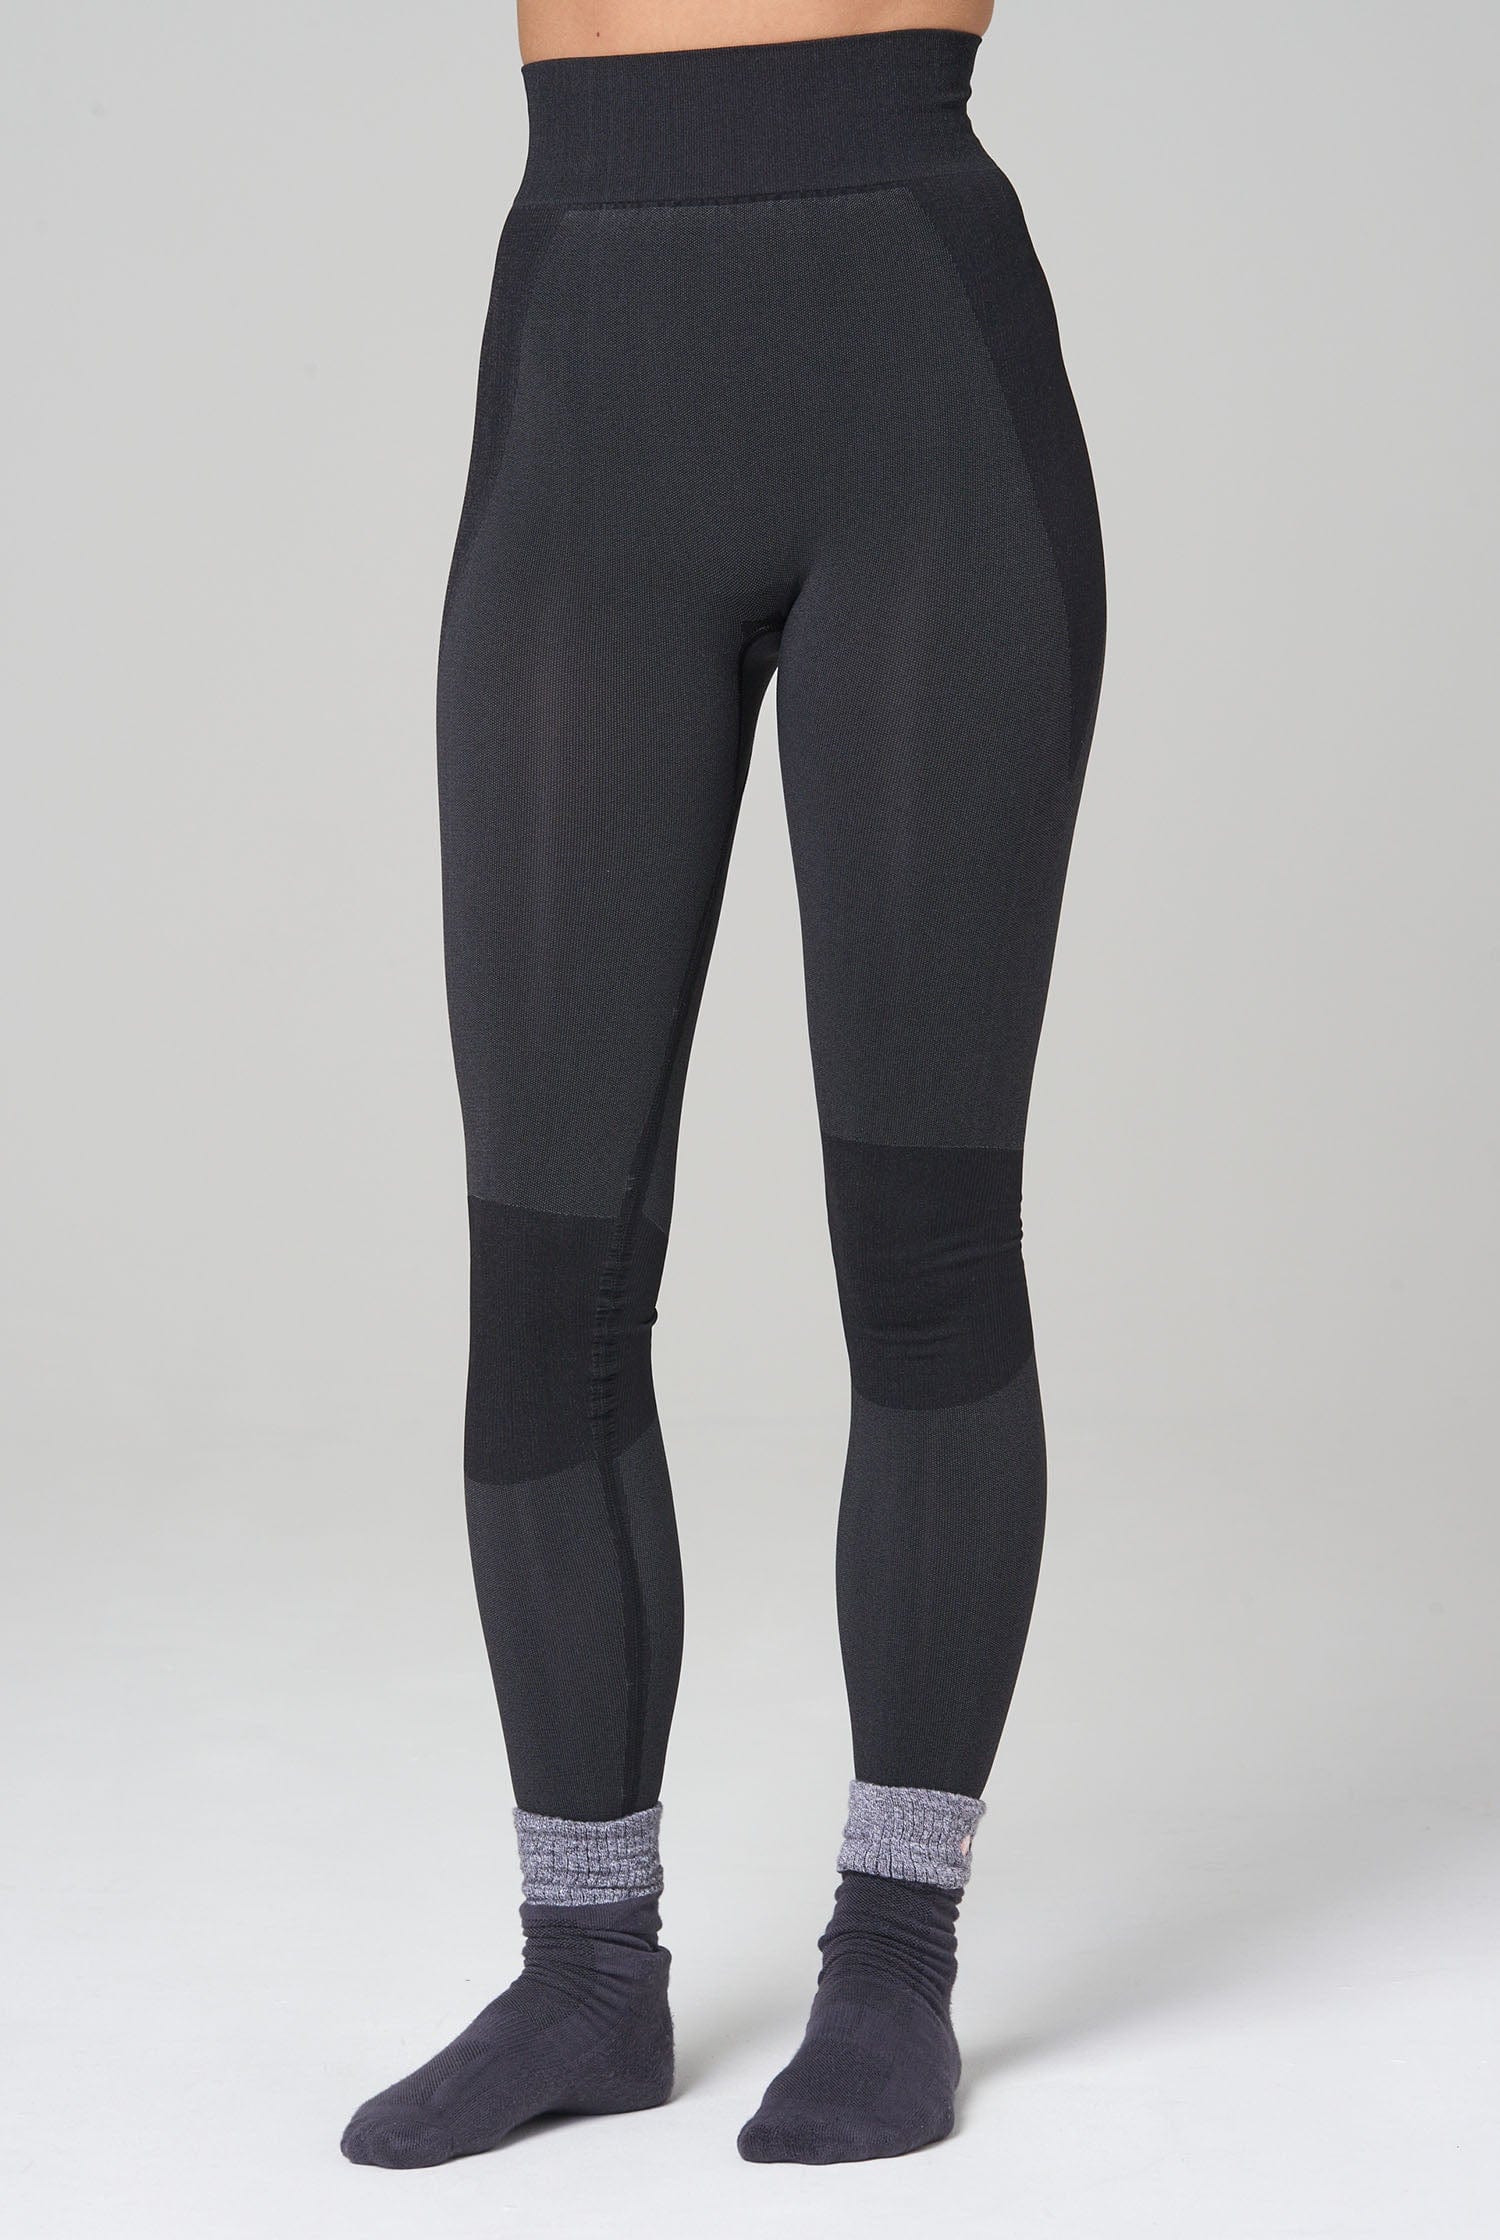 Thermal Tights & Stockings for Optimal Insulation